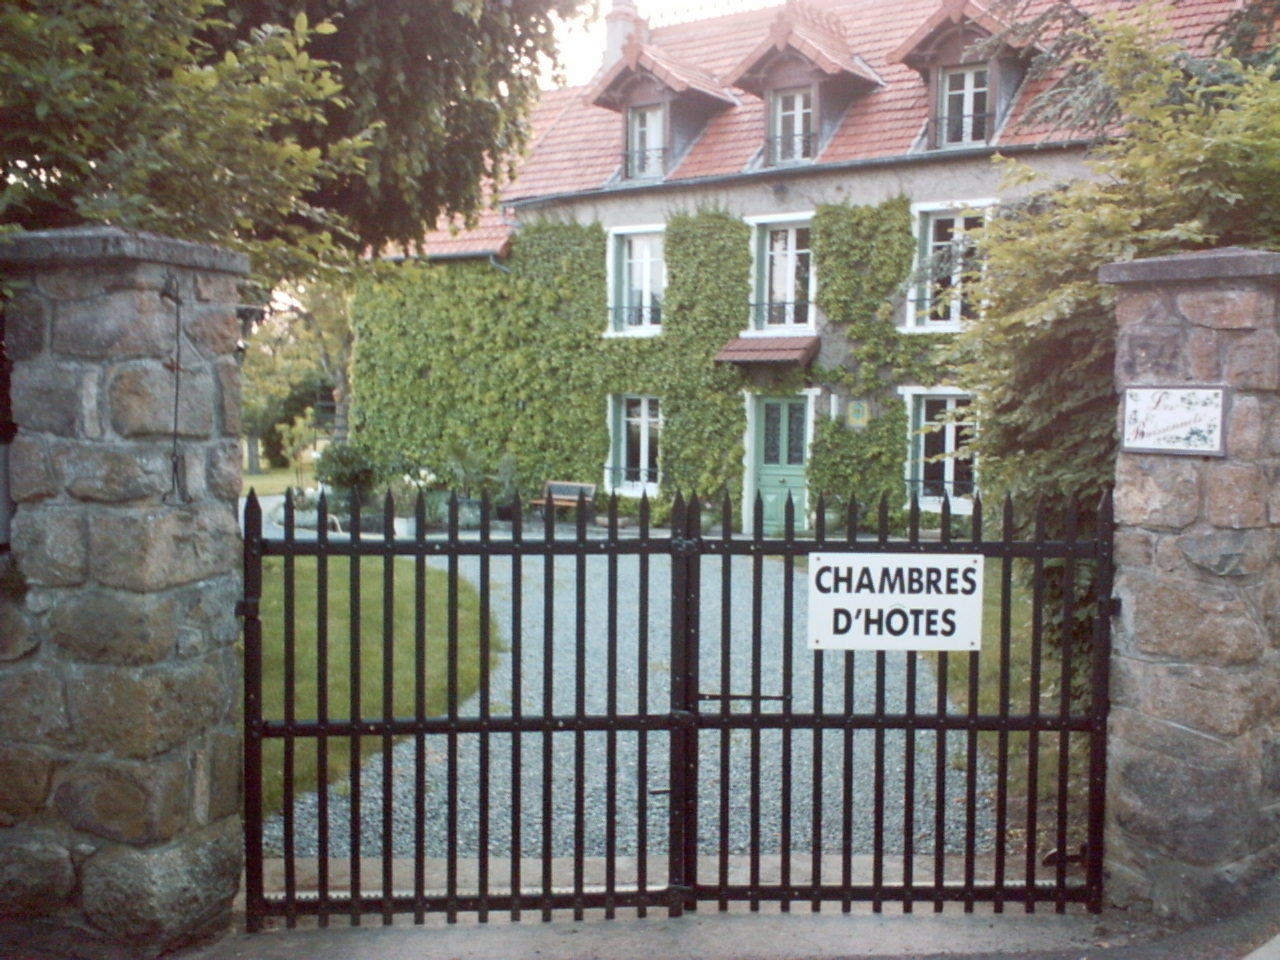 Chambres d'hotes